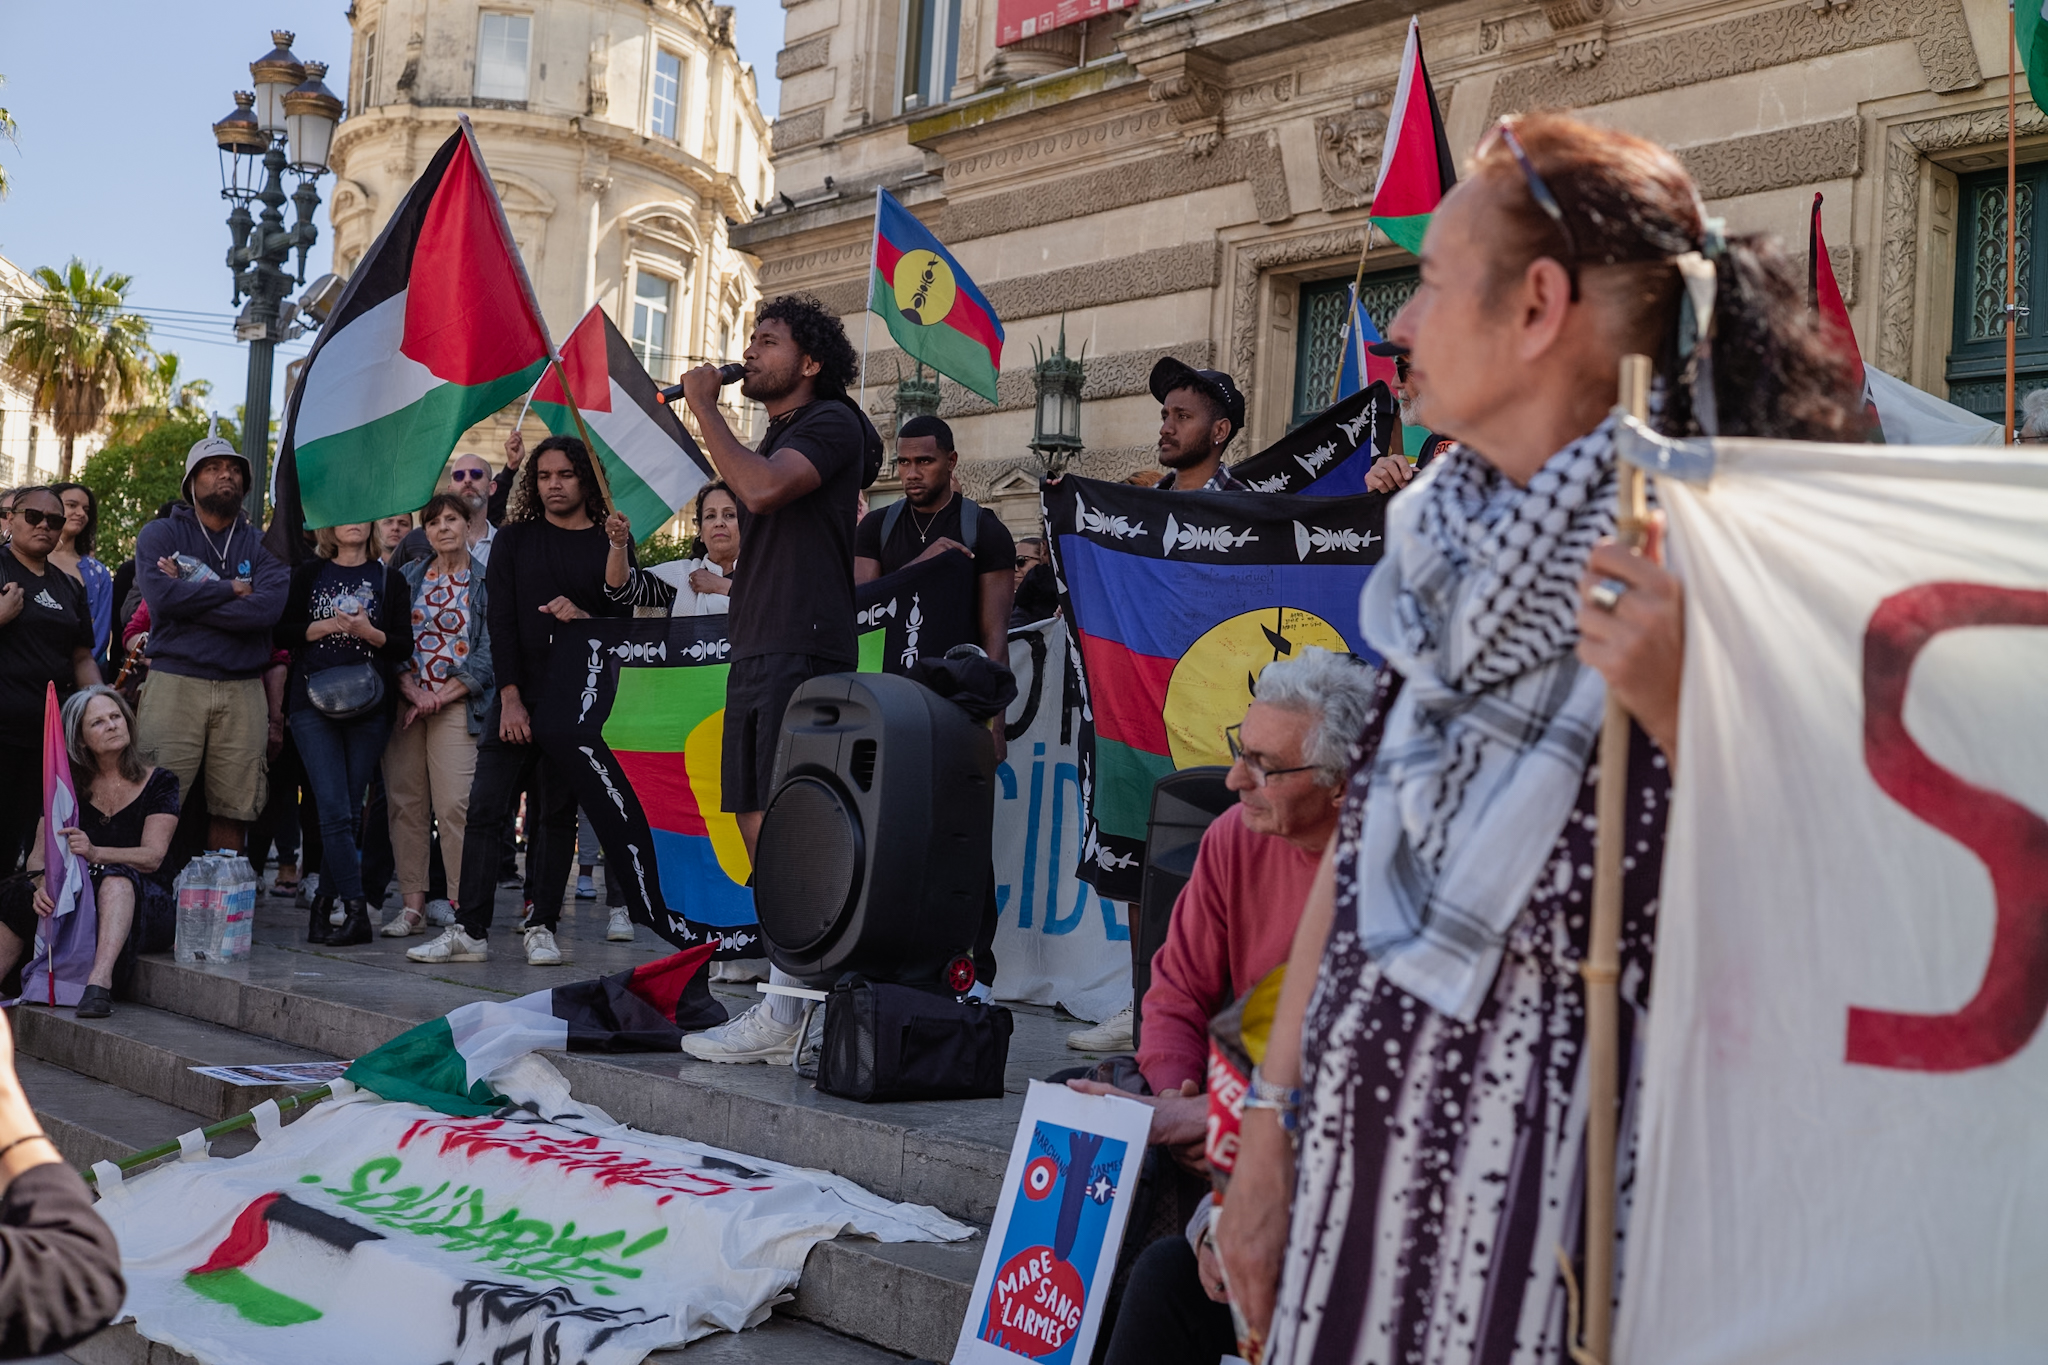 In Montpellier, Kanak and supporters of the Palestinian people demonstrated together "against colonialism" this Saturday, May 18. Photo by Mathieu Le Coz / Hans Lucas